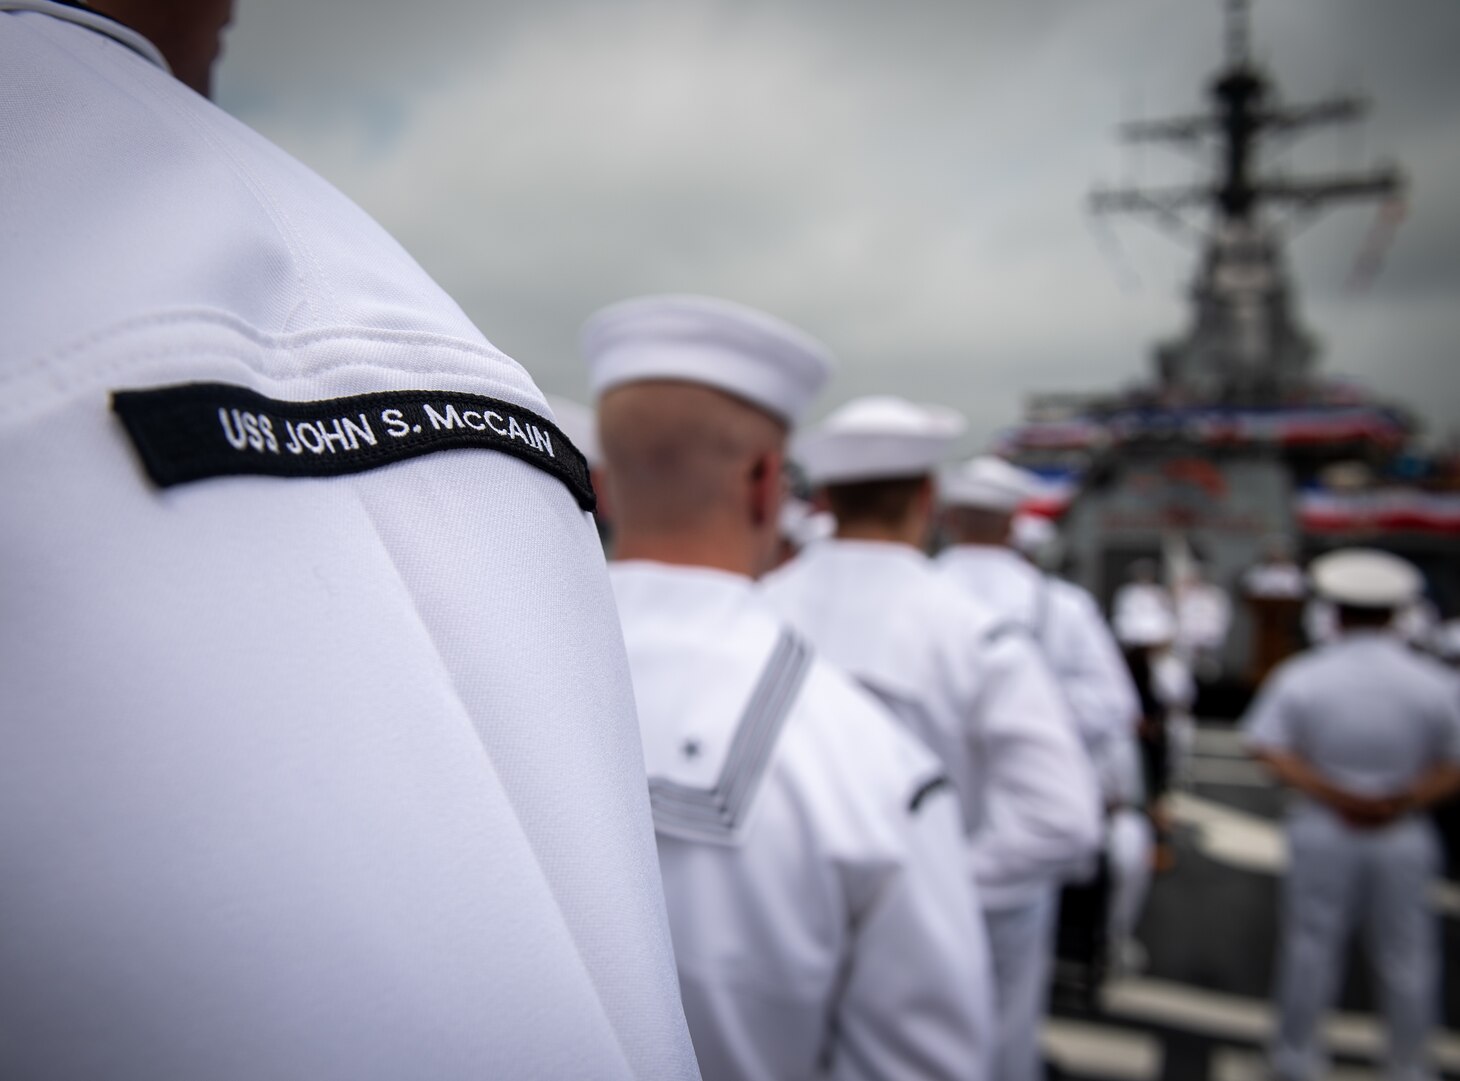 The crew of USS John S. McCain (DDG 56) stand in formation during the ship’s 25th anniversary and change of command ceremony, July 2, 2019 at Commander, Fleet Activities Yokosuka, Japan. McCain was commissioned on July 2, 1994 in Bath, Maine and was originally named in honor of Admirals John S. McCain Sr. and Jr. In a rededication ceremony on July 12, 2018 the late Sen. John S. McCain III was officially added to the namesake.